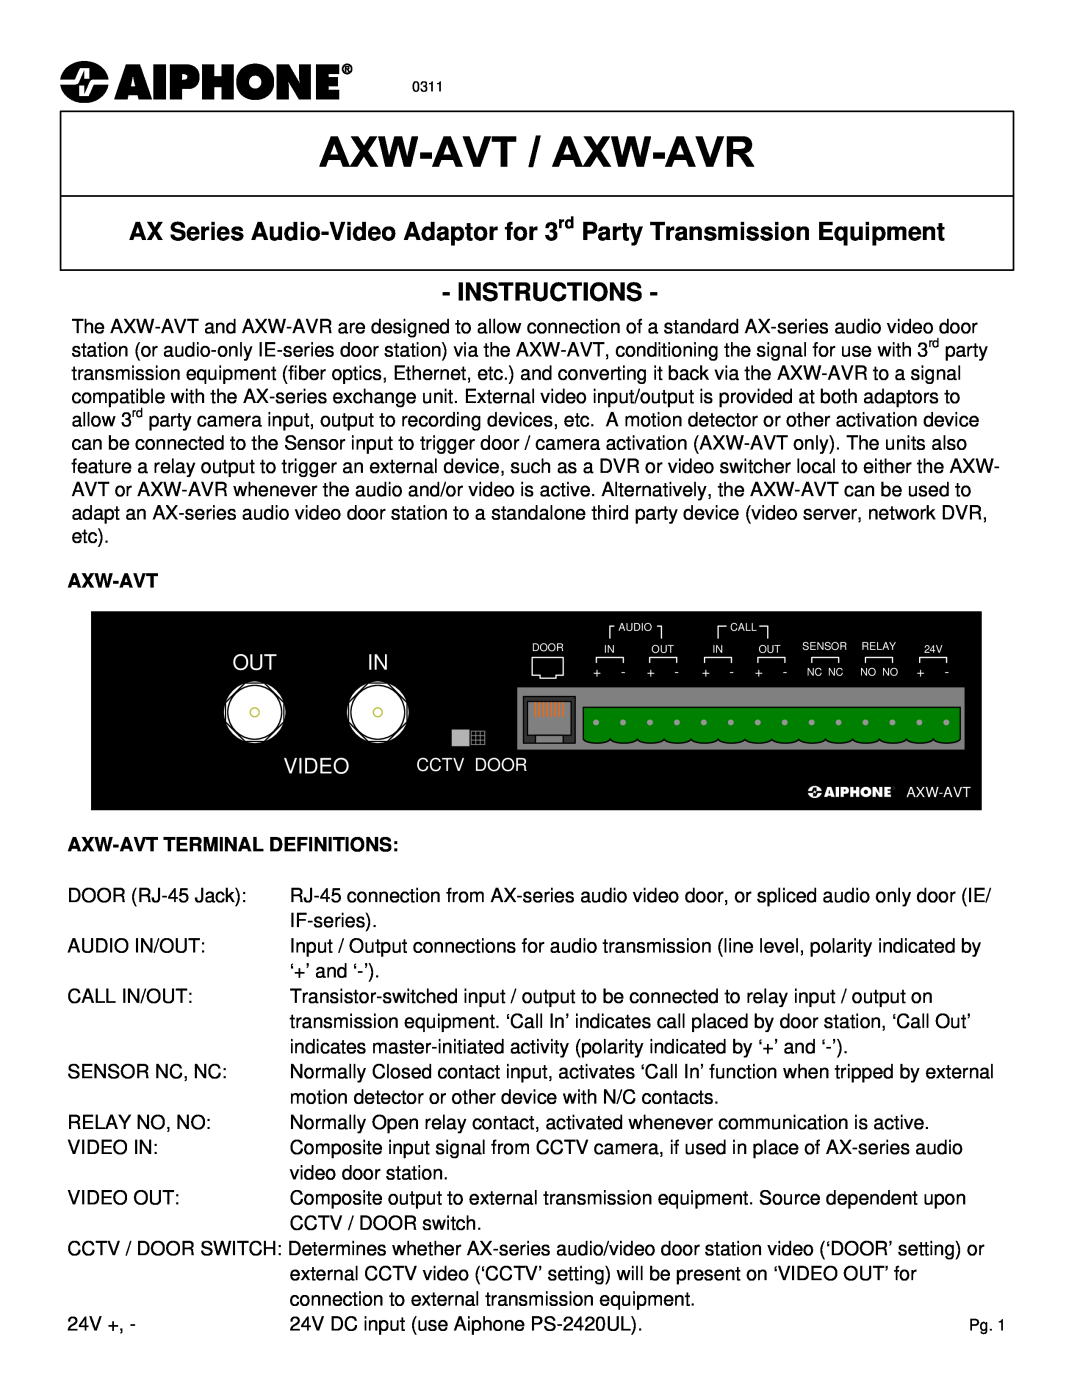 Aiphone AXW-AVT manual Instructions, Out In, Video, Axw-Avtterminal Definitions 